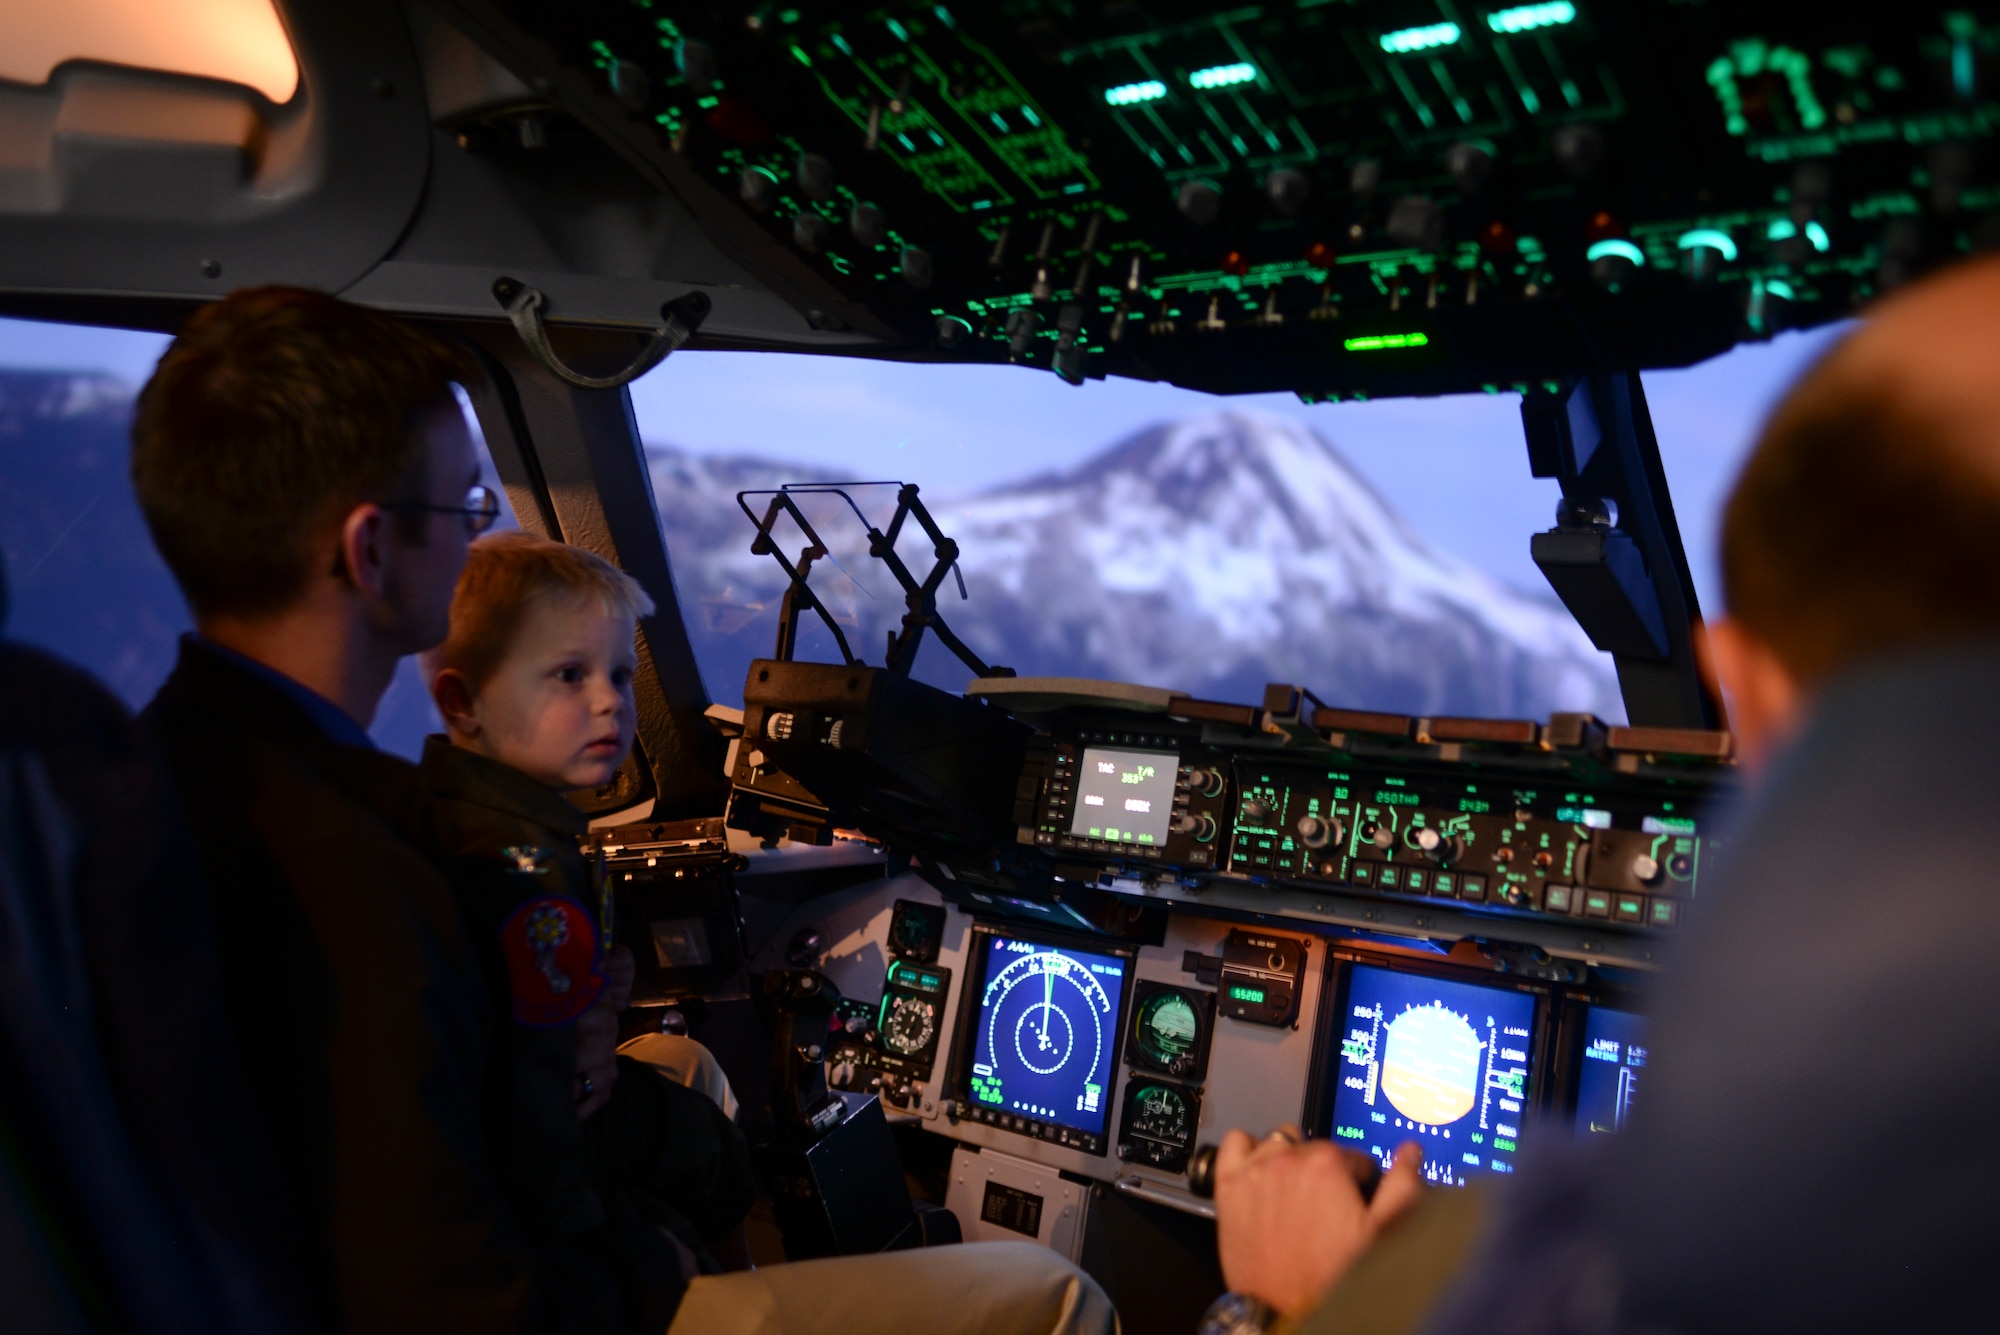 Maj. Erick Brough flies two-year-old John Austin and his father, Jason, past Mount Rainier, Wash., in a C-17 Globemaster III flight simulator May 15, 2014. The Austin family visited Altus Air Force Base and explored airplanes, fire trucks and the base air traffic control tower. (U.S. Air Force photo/Staff Sgt. Nathanael Callon) 